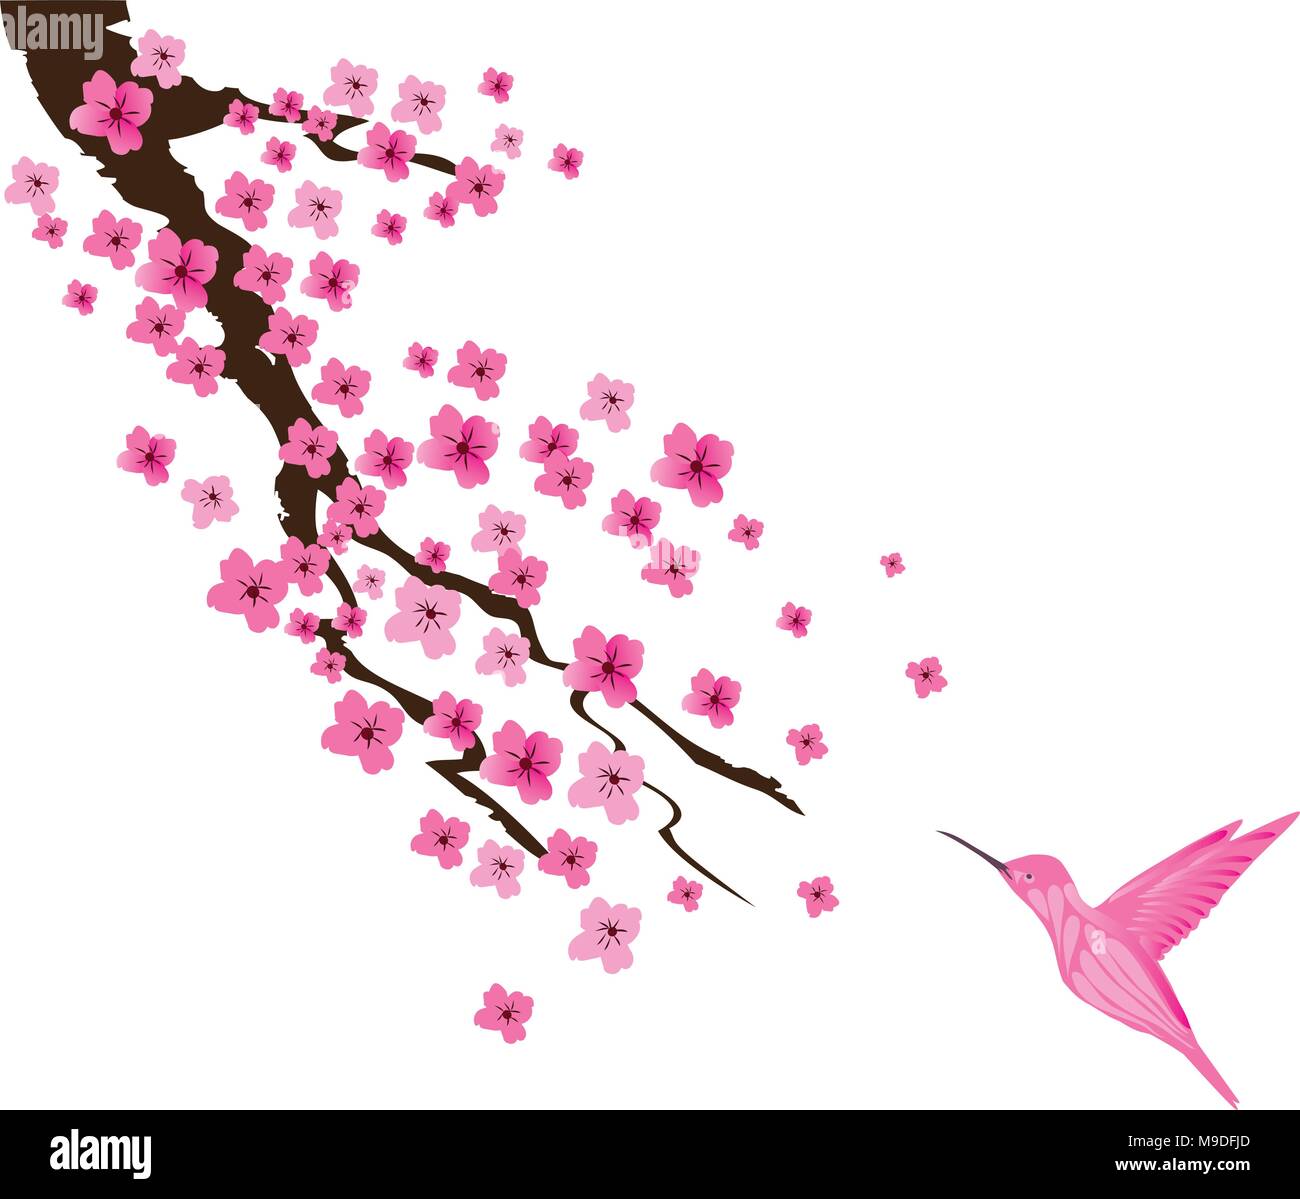 vector illustration of a cherry blossom with pink hummingbird Stock Vector